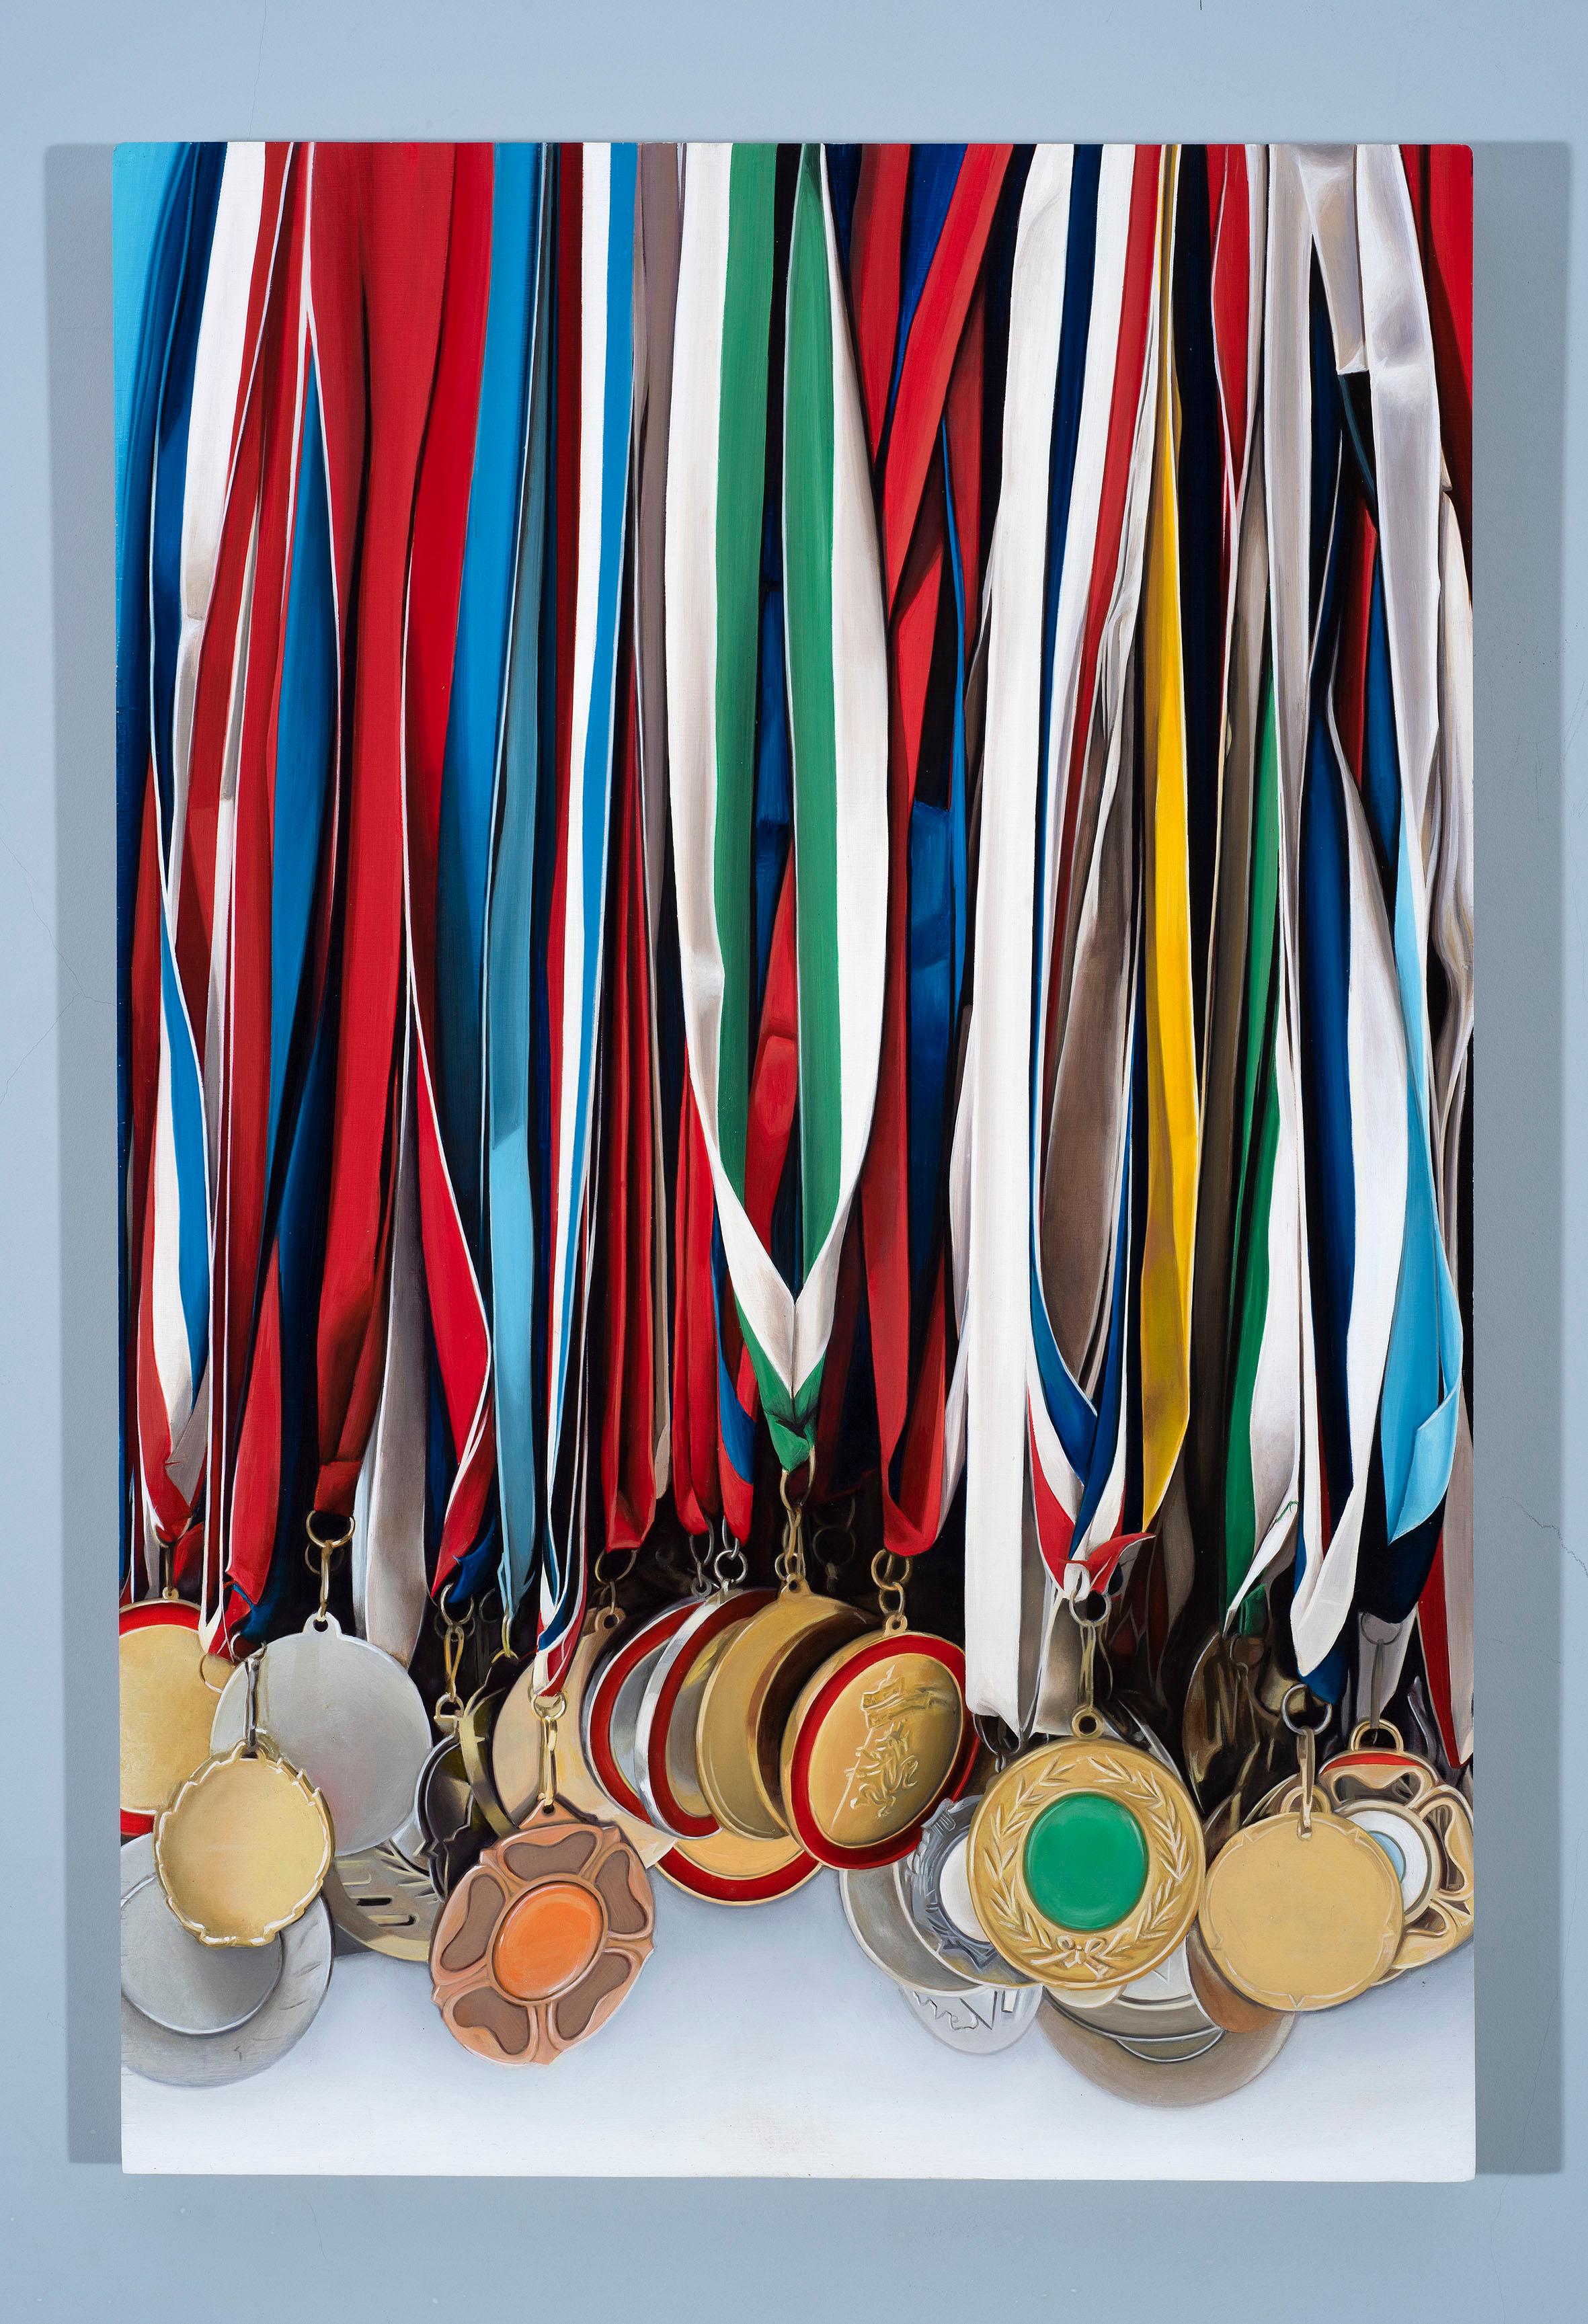 This technically astounding, photorealistic and colourful painting of a rack of medals is executed in oil on a wood panel.  Ian Robinson’s work is concerned with obsessions and the back-stories of collections.  Working mainly in still life he